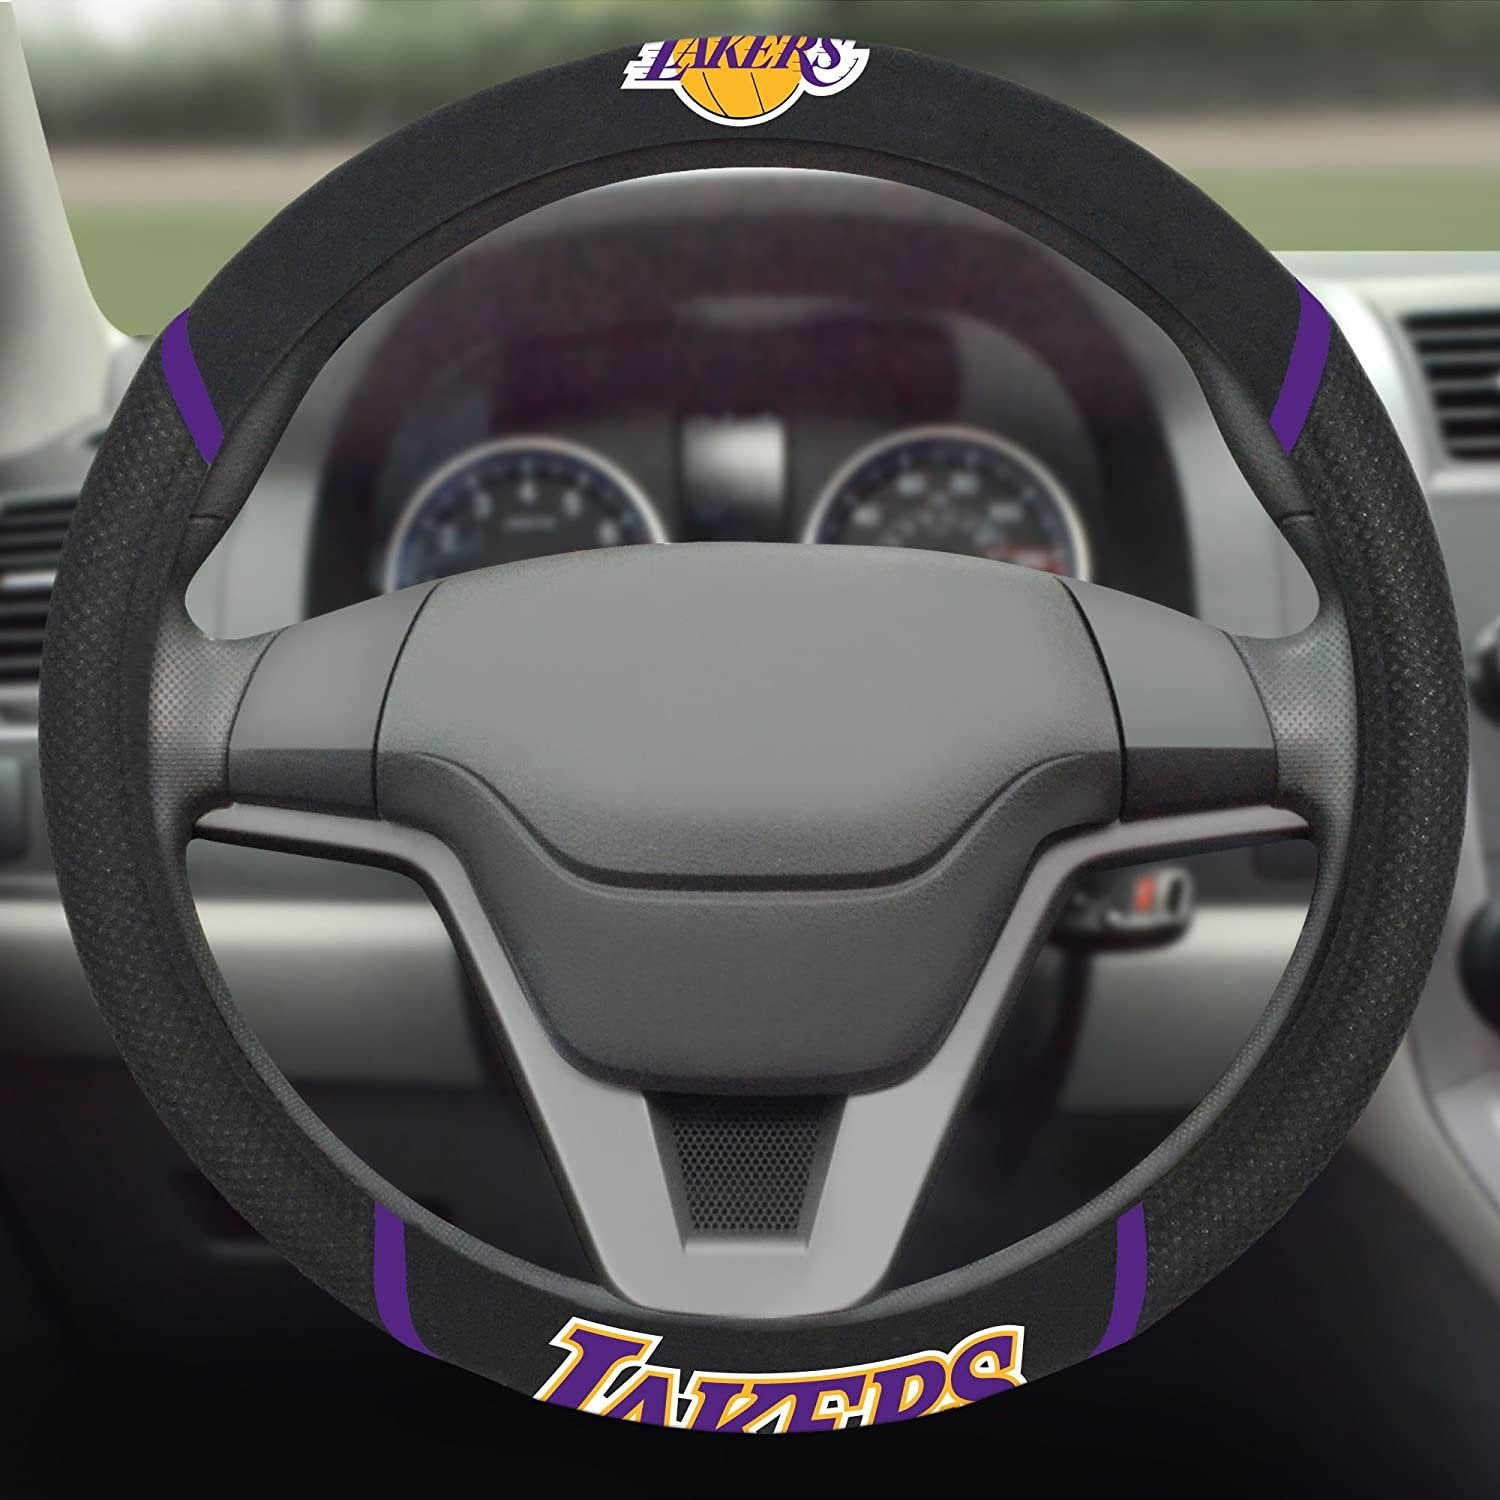 Los Angeles Lakers Steering Wheel Cover Premium Embroidered Black 15 Inch